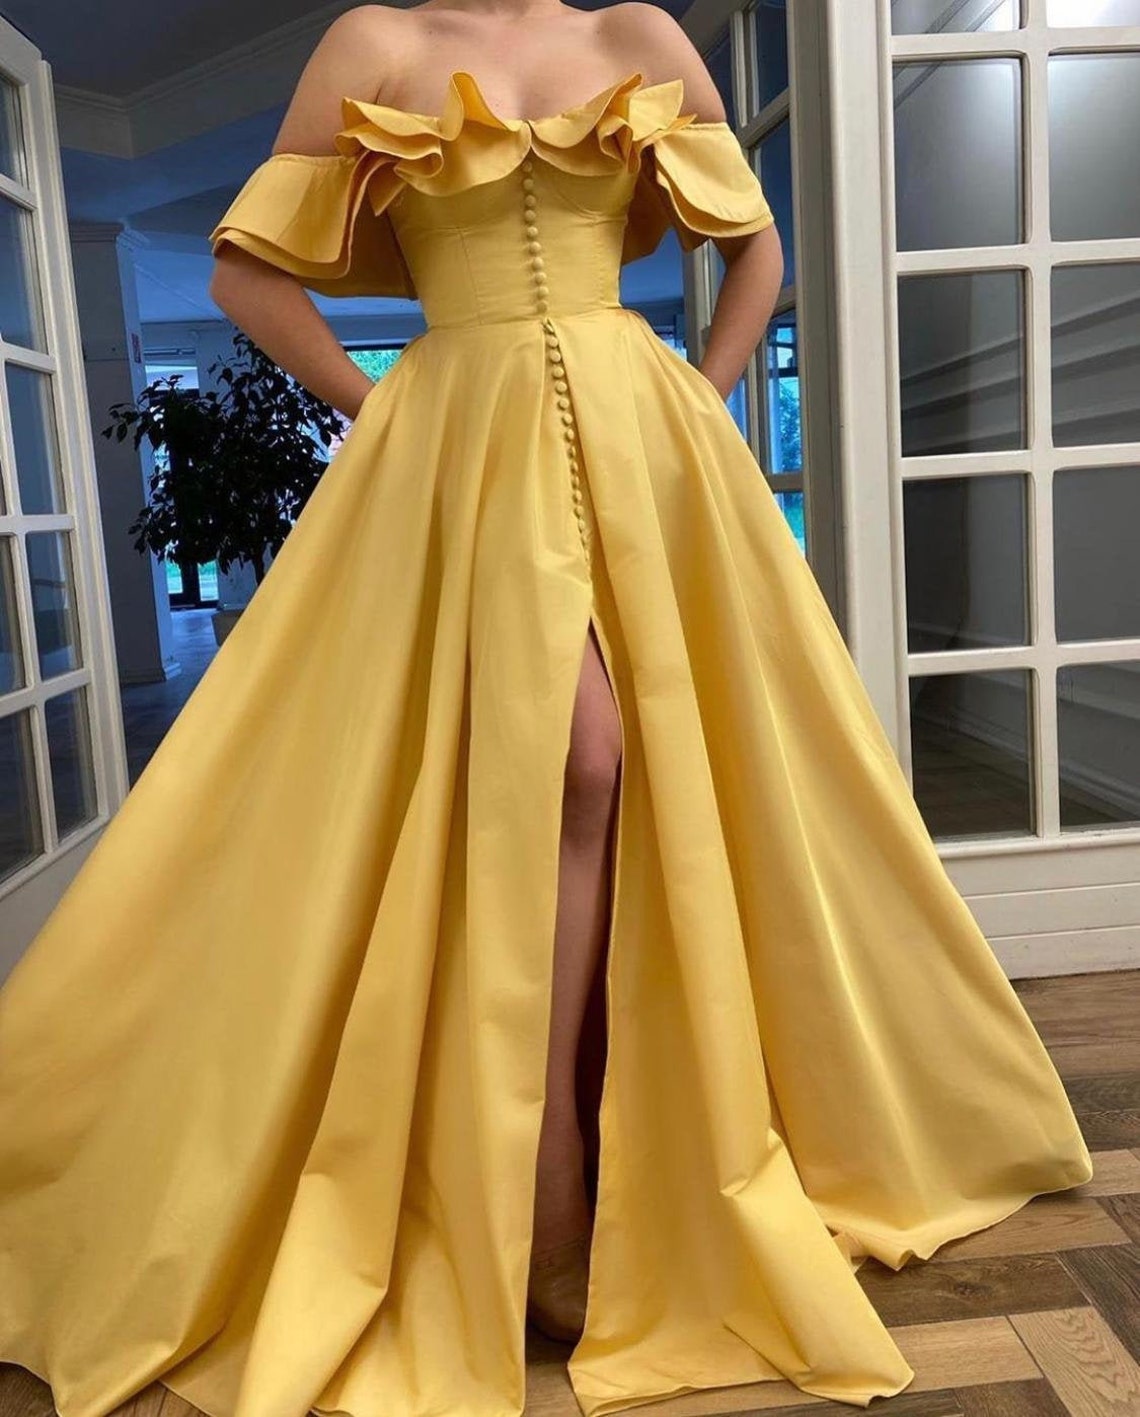 Off-shoulder yellow gown with sexy slit Black evening dress | Etsy